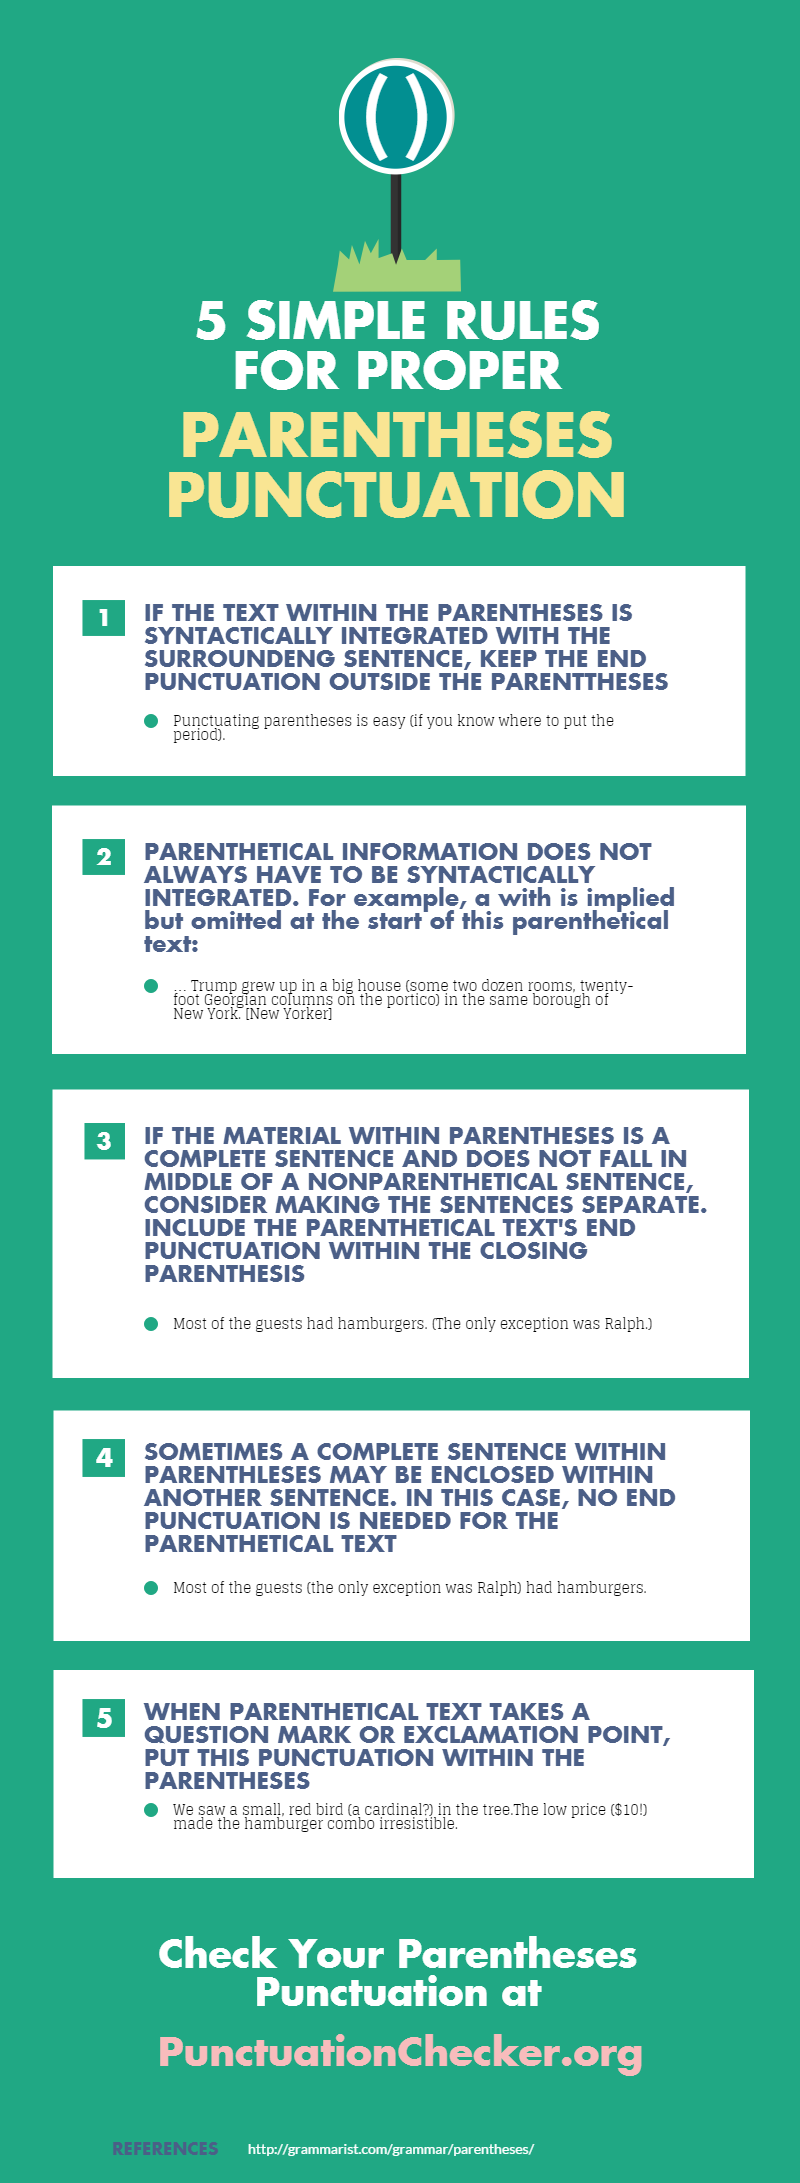 5 simple rules for proper parentheses punctuation